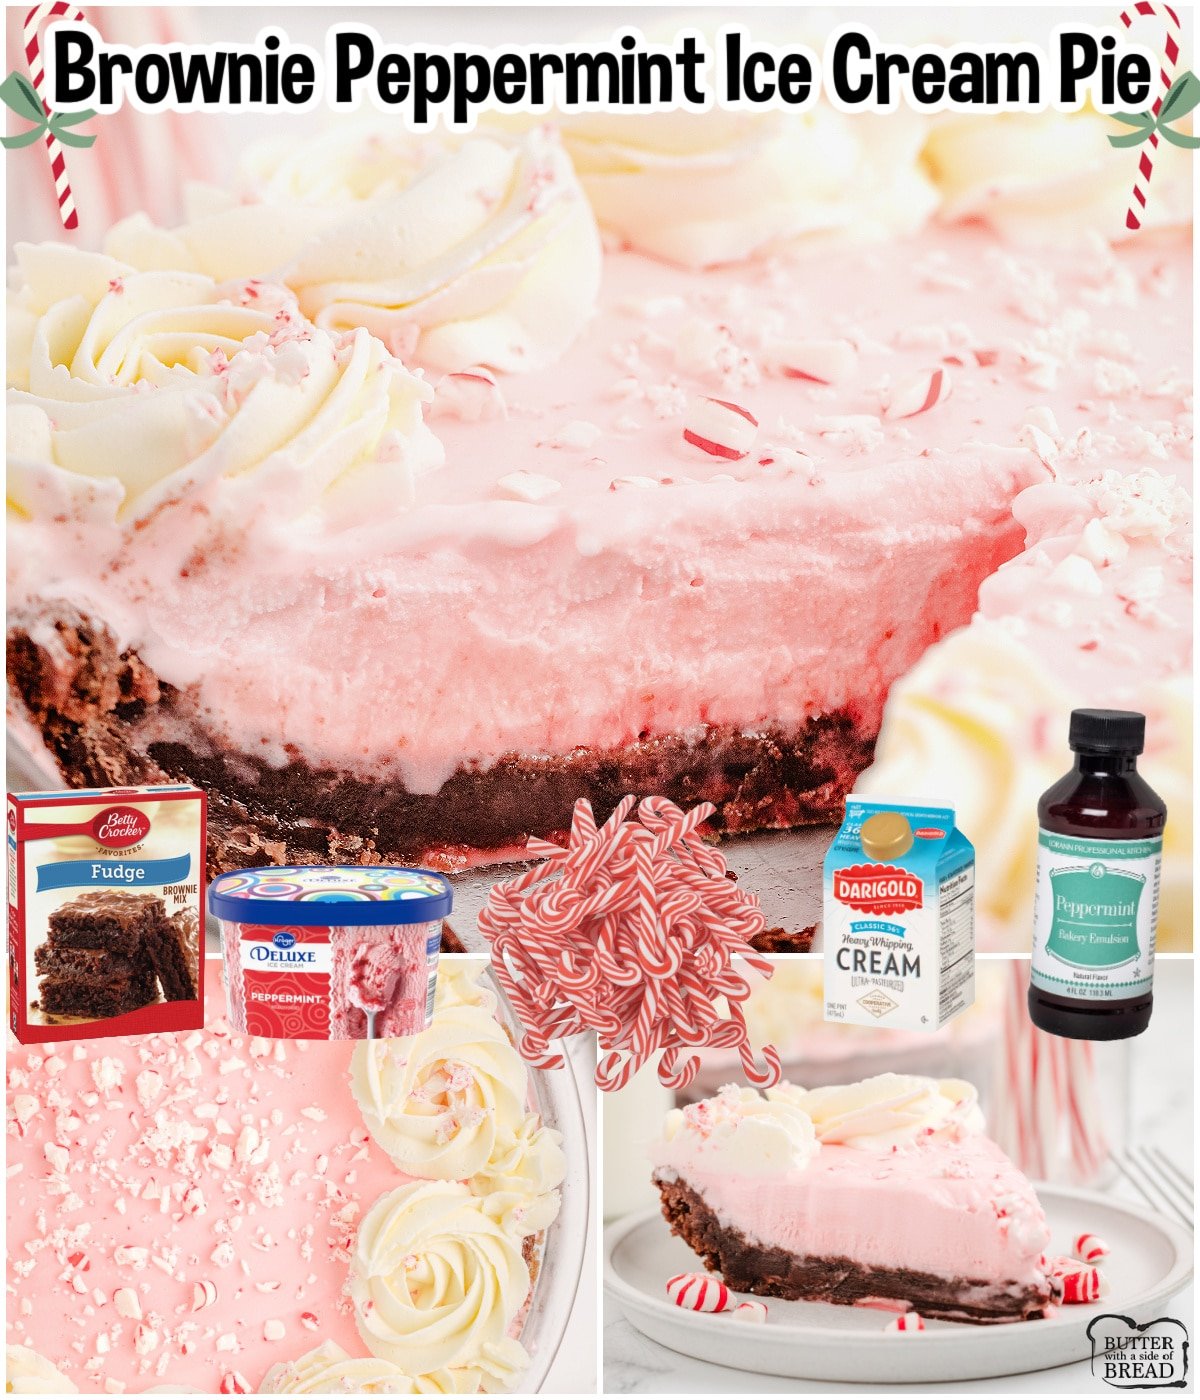 Brownie Peppermint Ice Cream Pie is made with a brownie crust, topped with peppermint ice cream & whipped cream!  Perfect peppermint dessert for the holidays! 